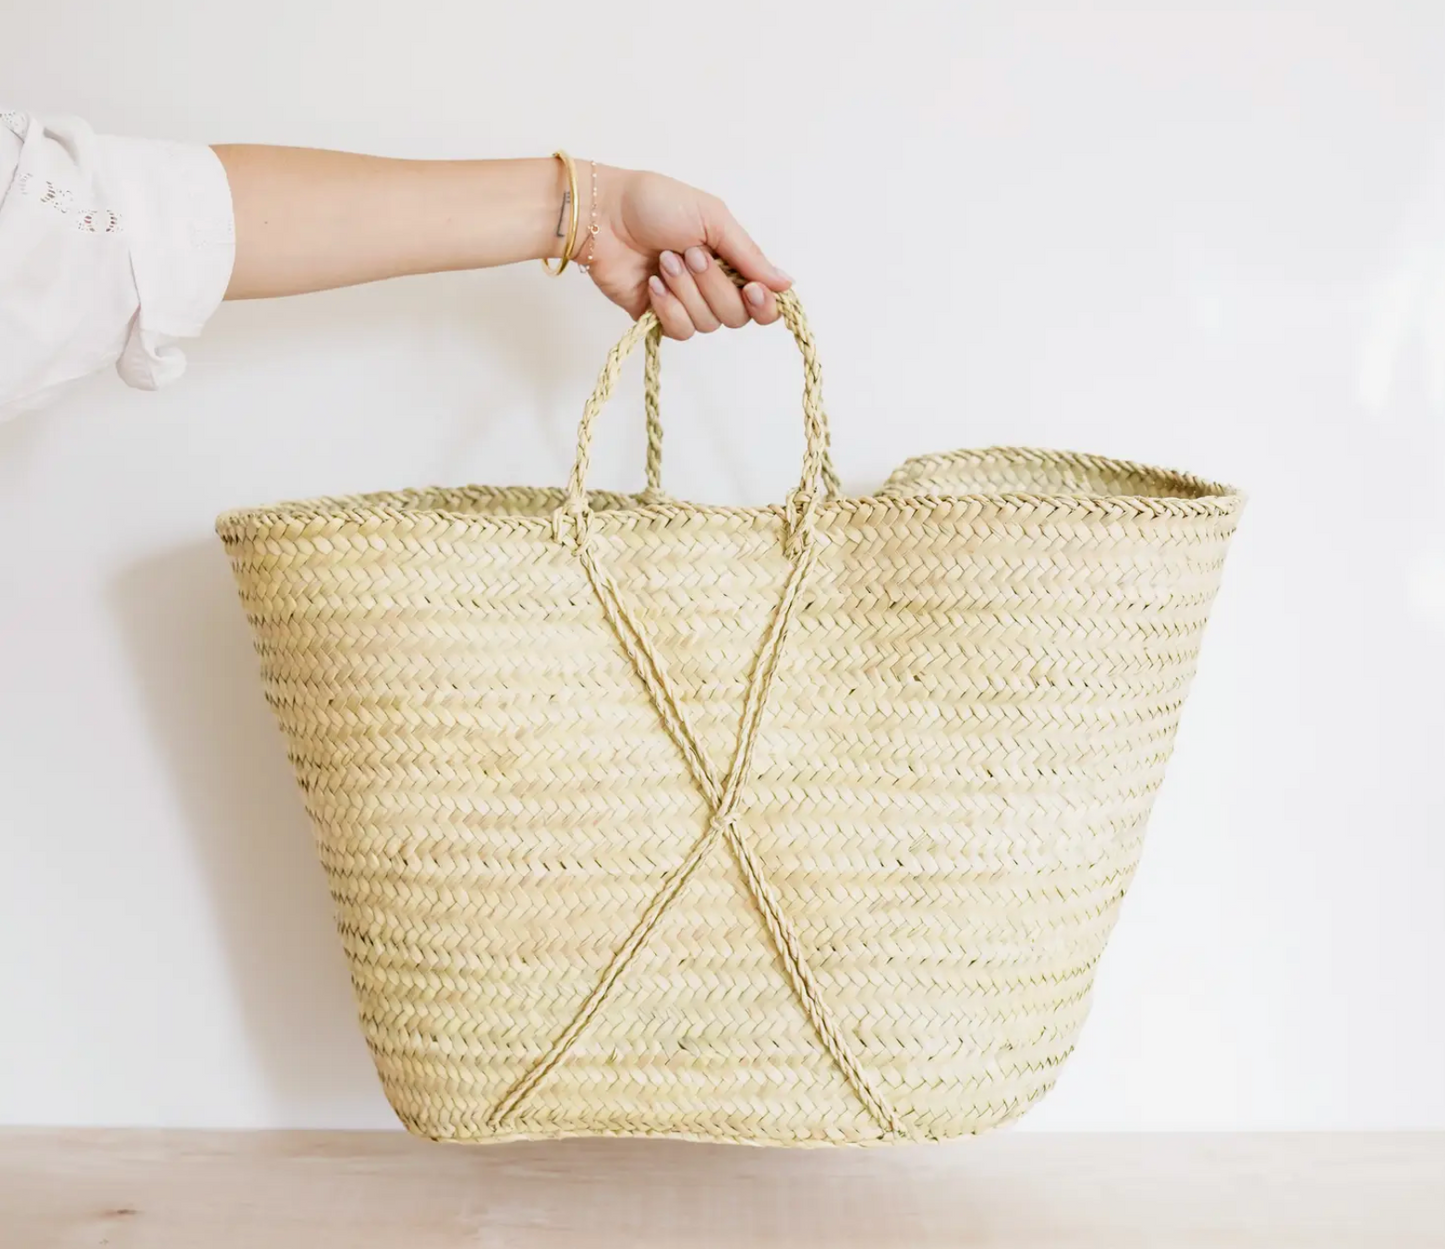 Provence French Basket Large - Straw Bag made in Morocco